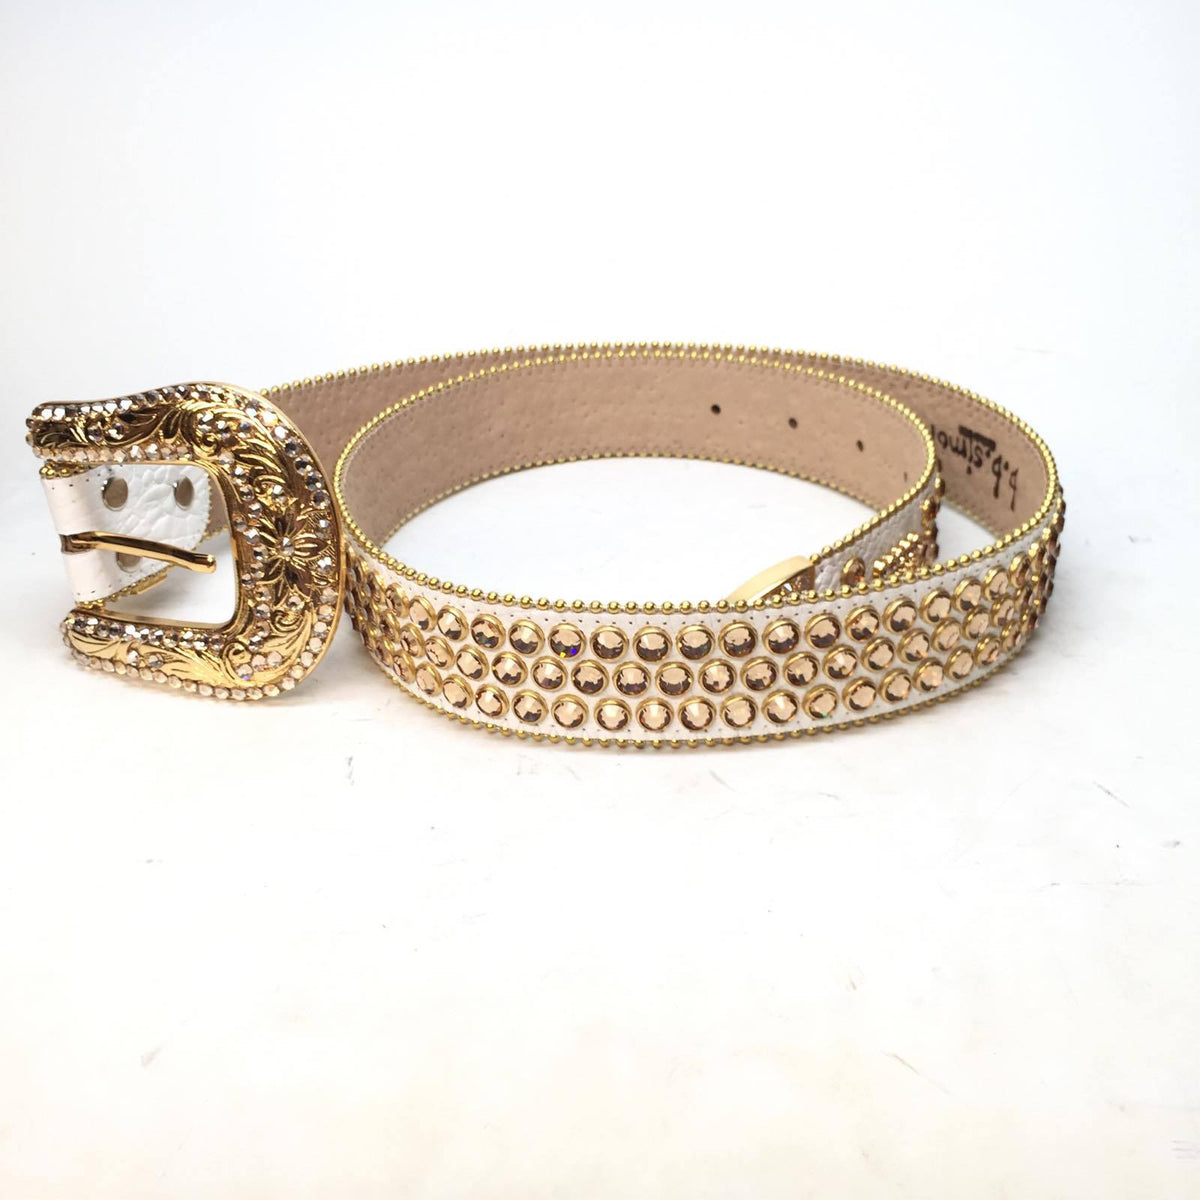 b.b. Simon Fully loaded 'Gold White Croc' Crystal Belt - Dudes Boutique